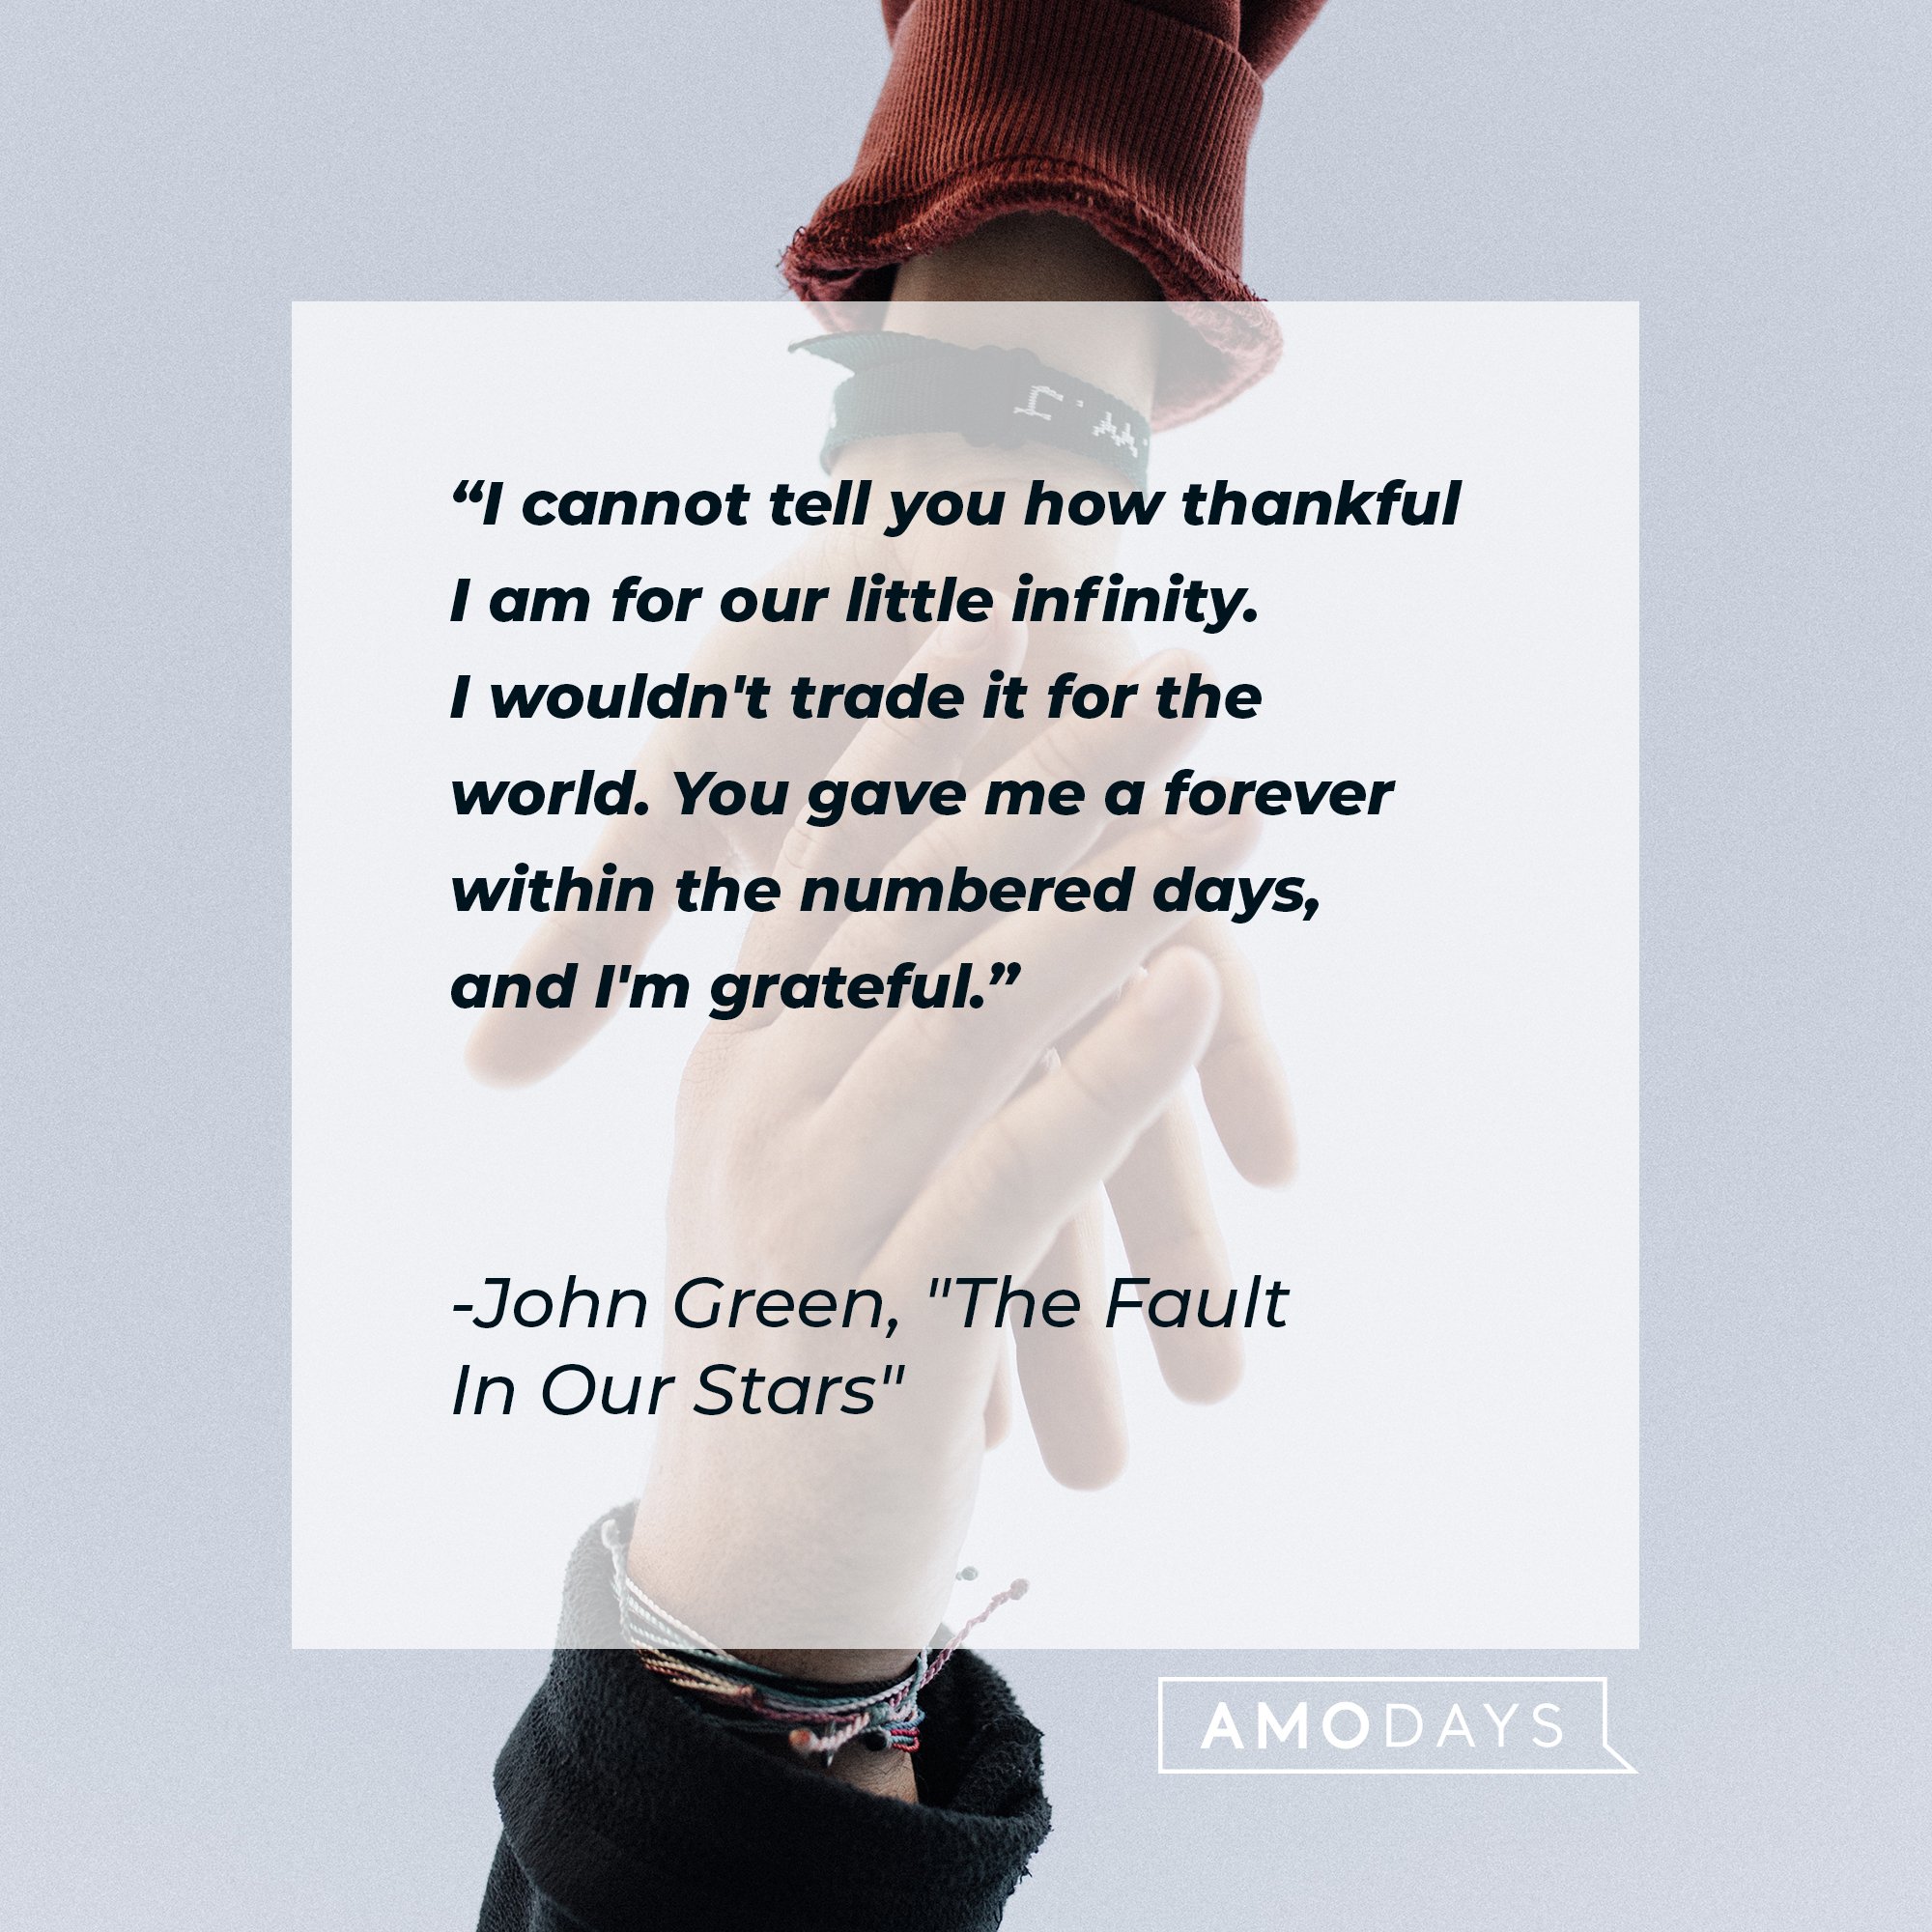 John Green's quote from “The Fault In Our Stars”: "I cannot tell you how thankful I am for our little infinity. I wouldn't trade it for the world. You gave me a forever within the numbered days, and I'm grateful." | Image: AmoDays